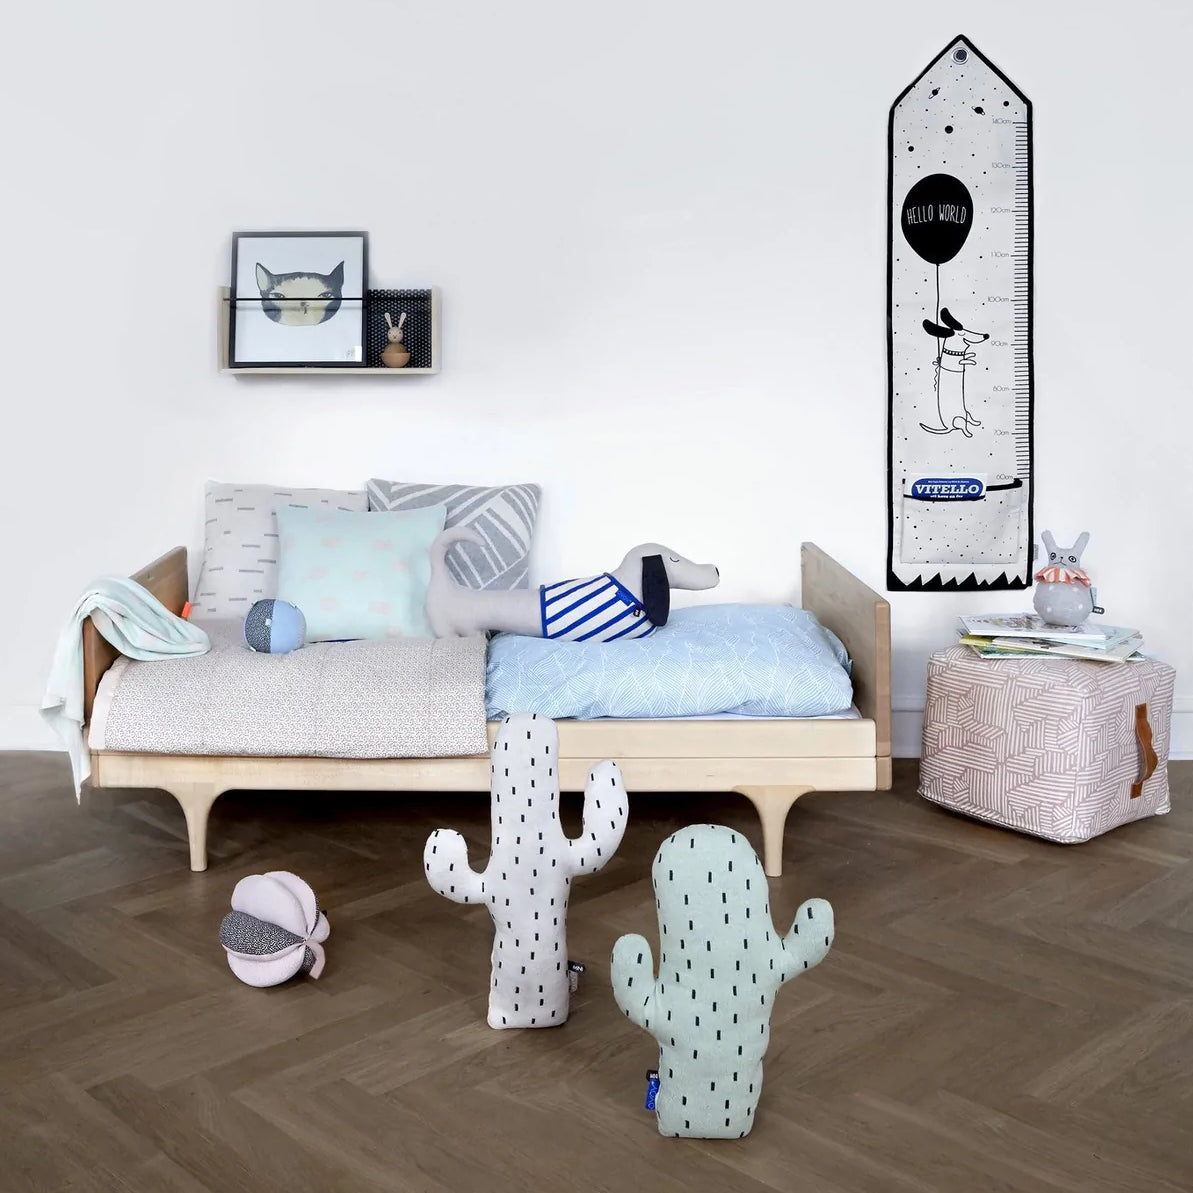 OYOY Slinkii the dog happily snuggling on the day bed of this Scandinavian inspired children's room setting